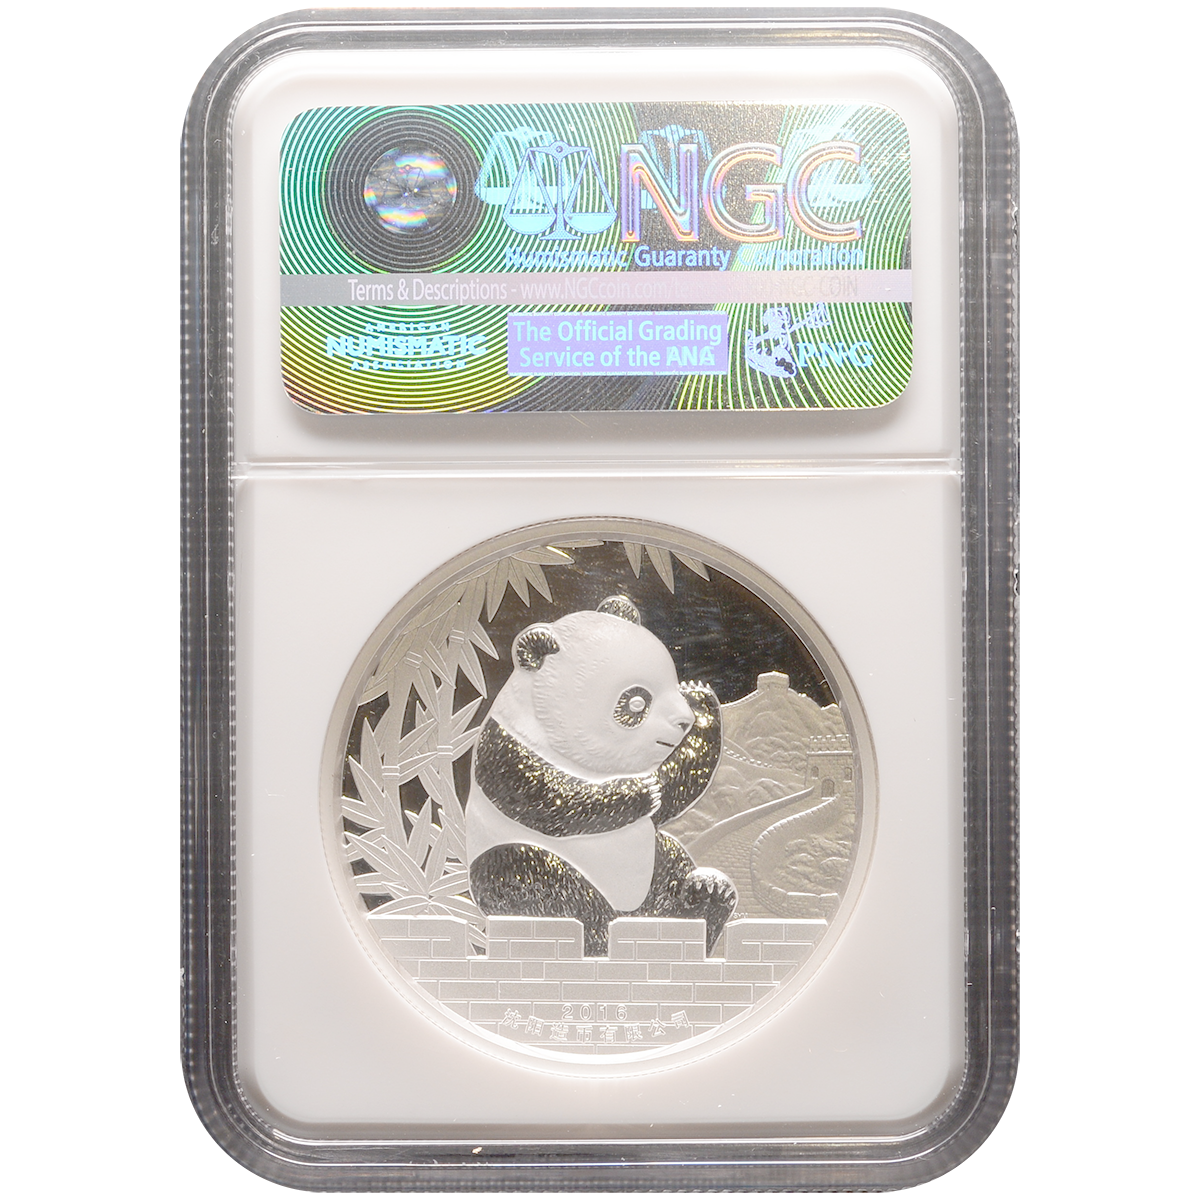 2016 Chinese Lunar Panda Year of the Monkey Silver Proof Coin - OZB